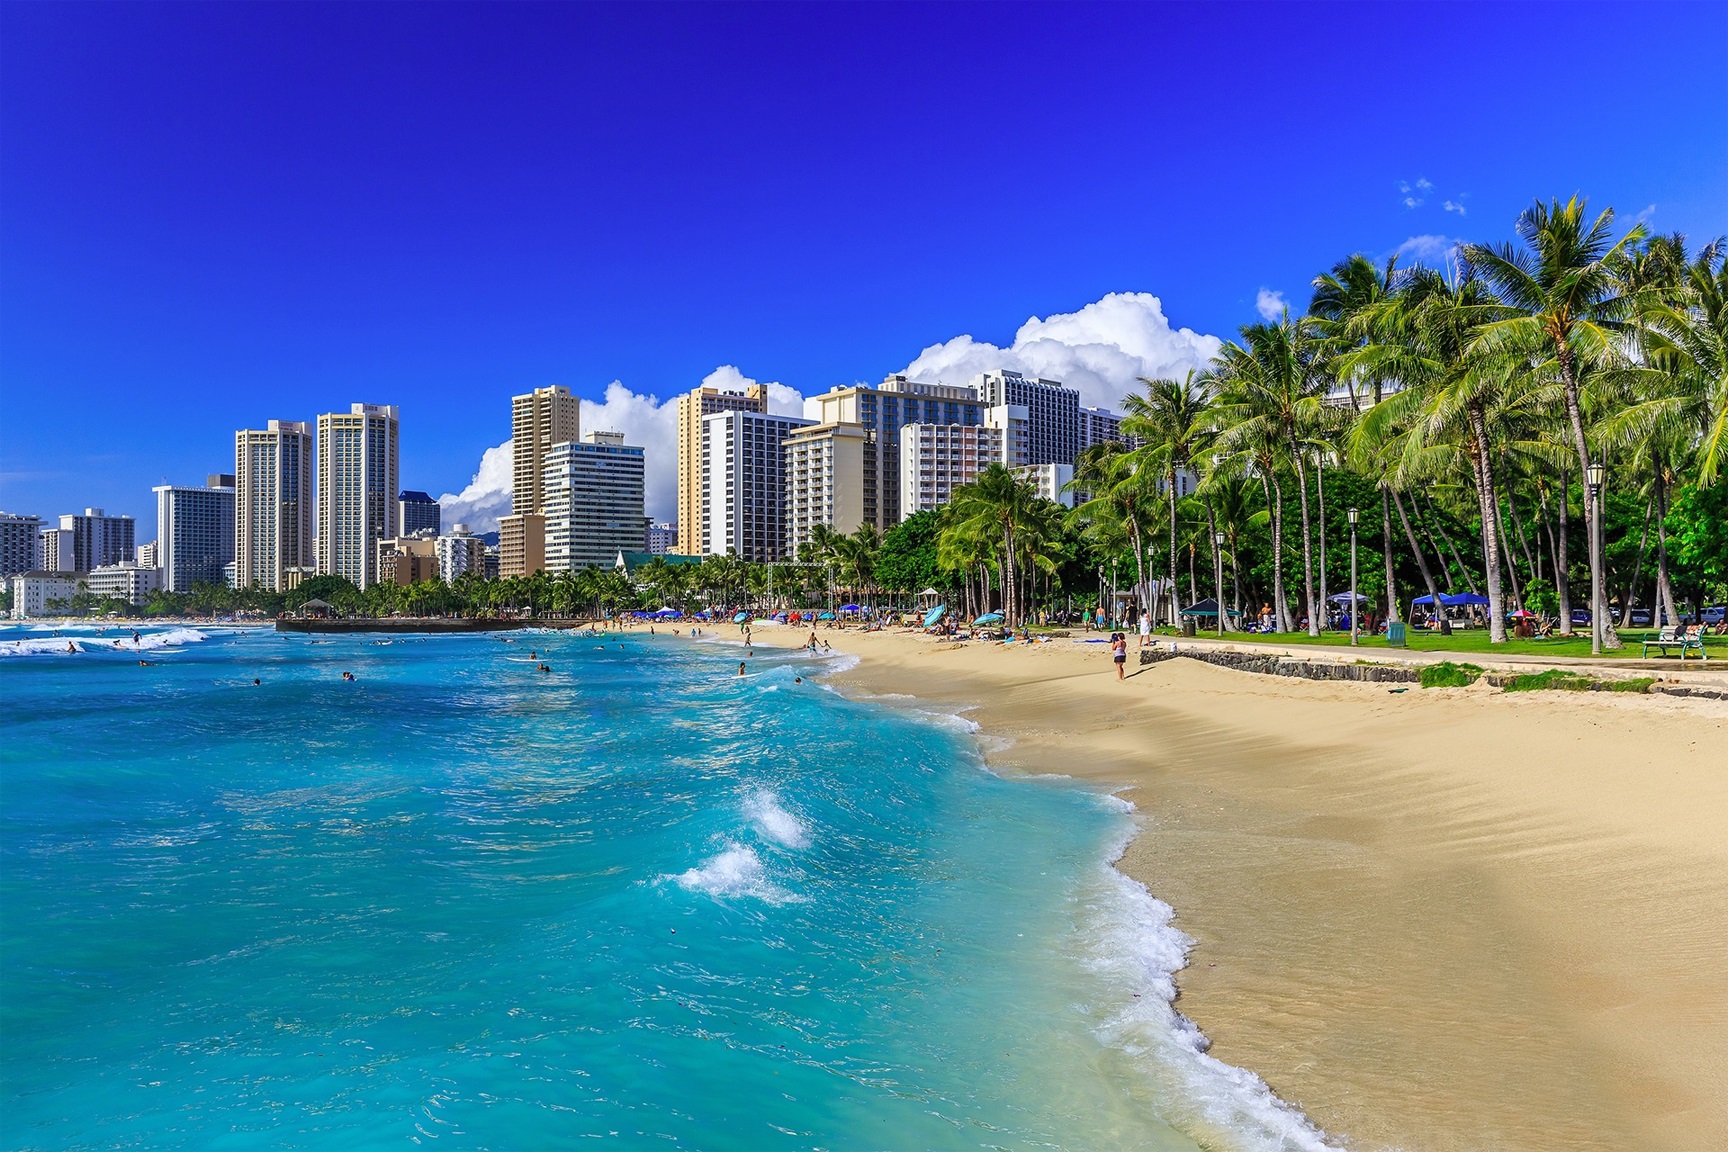 Fall 2021 Honolulu Travel COVID Requirements: What You Should Know